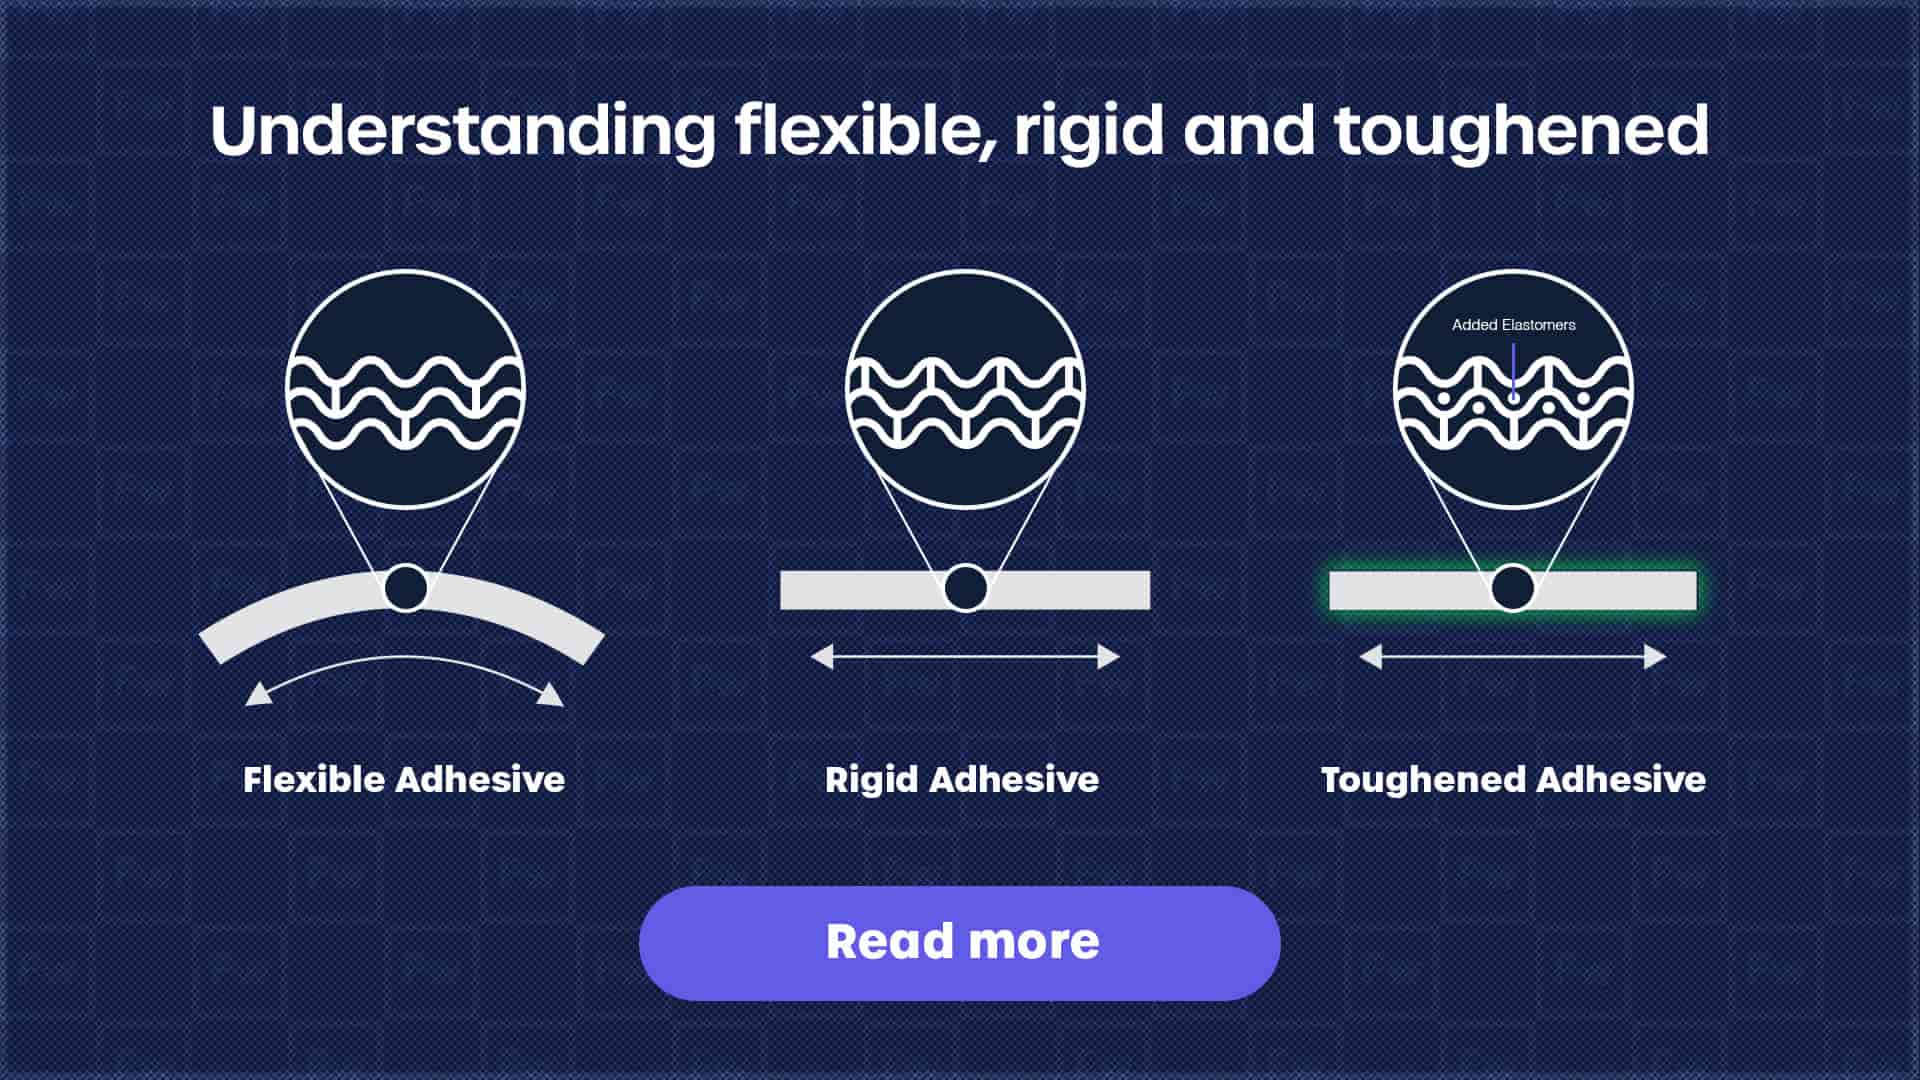 Understanding Flexible, Rigid, and Toughened Adhesives